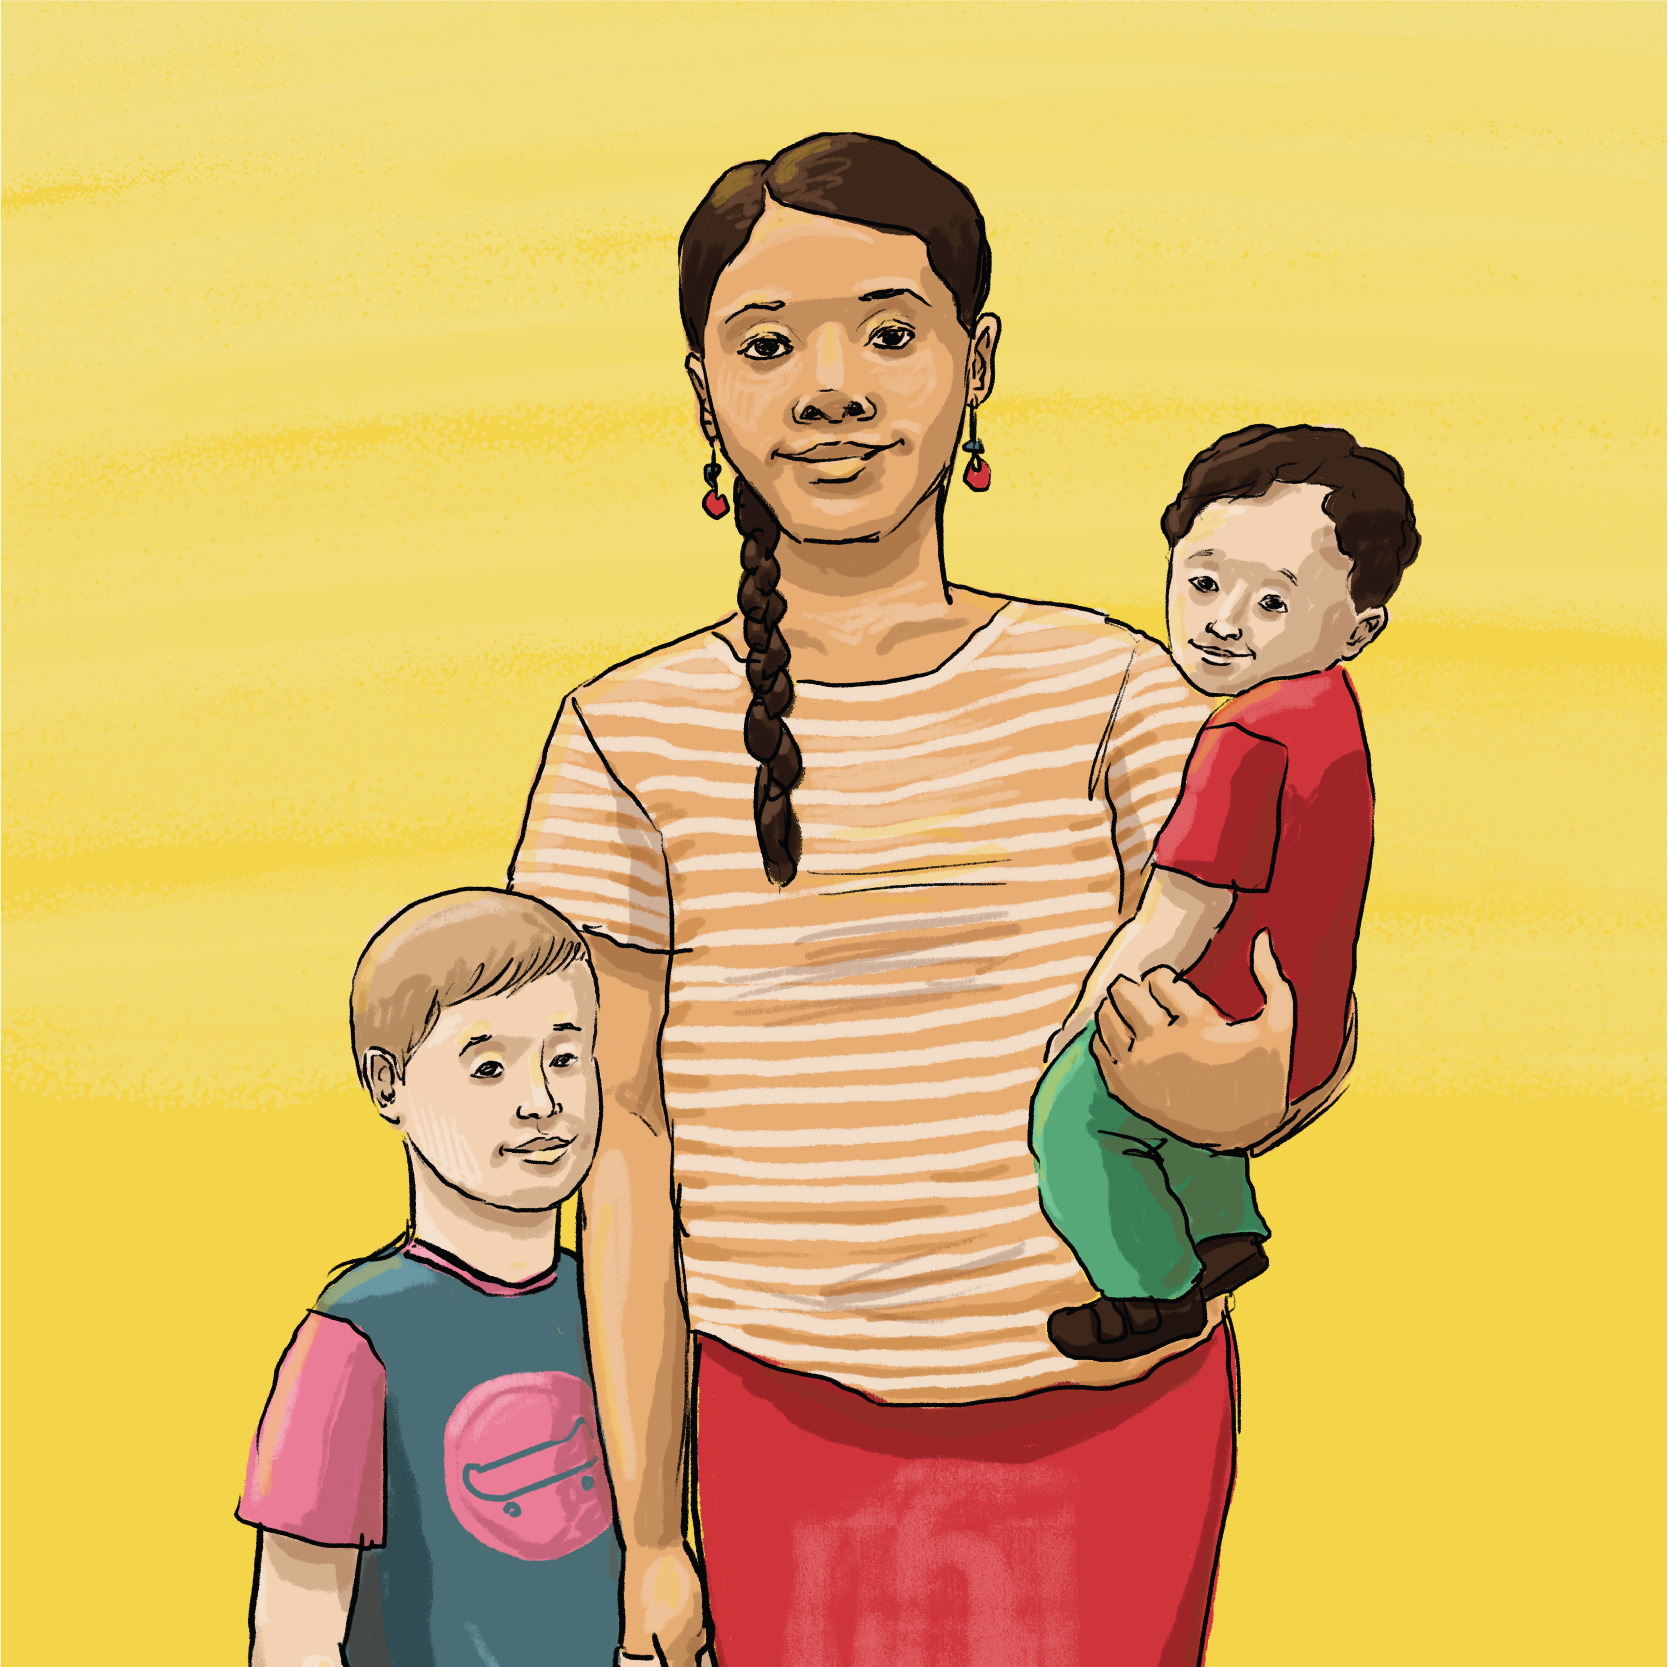 Watercolor portrait of a nanny and two children for CDWC by Robert Liu-Trujillo.